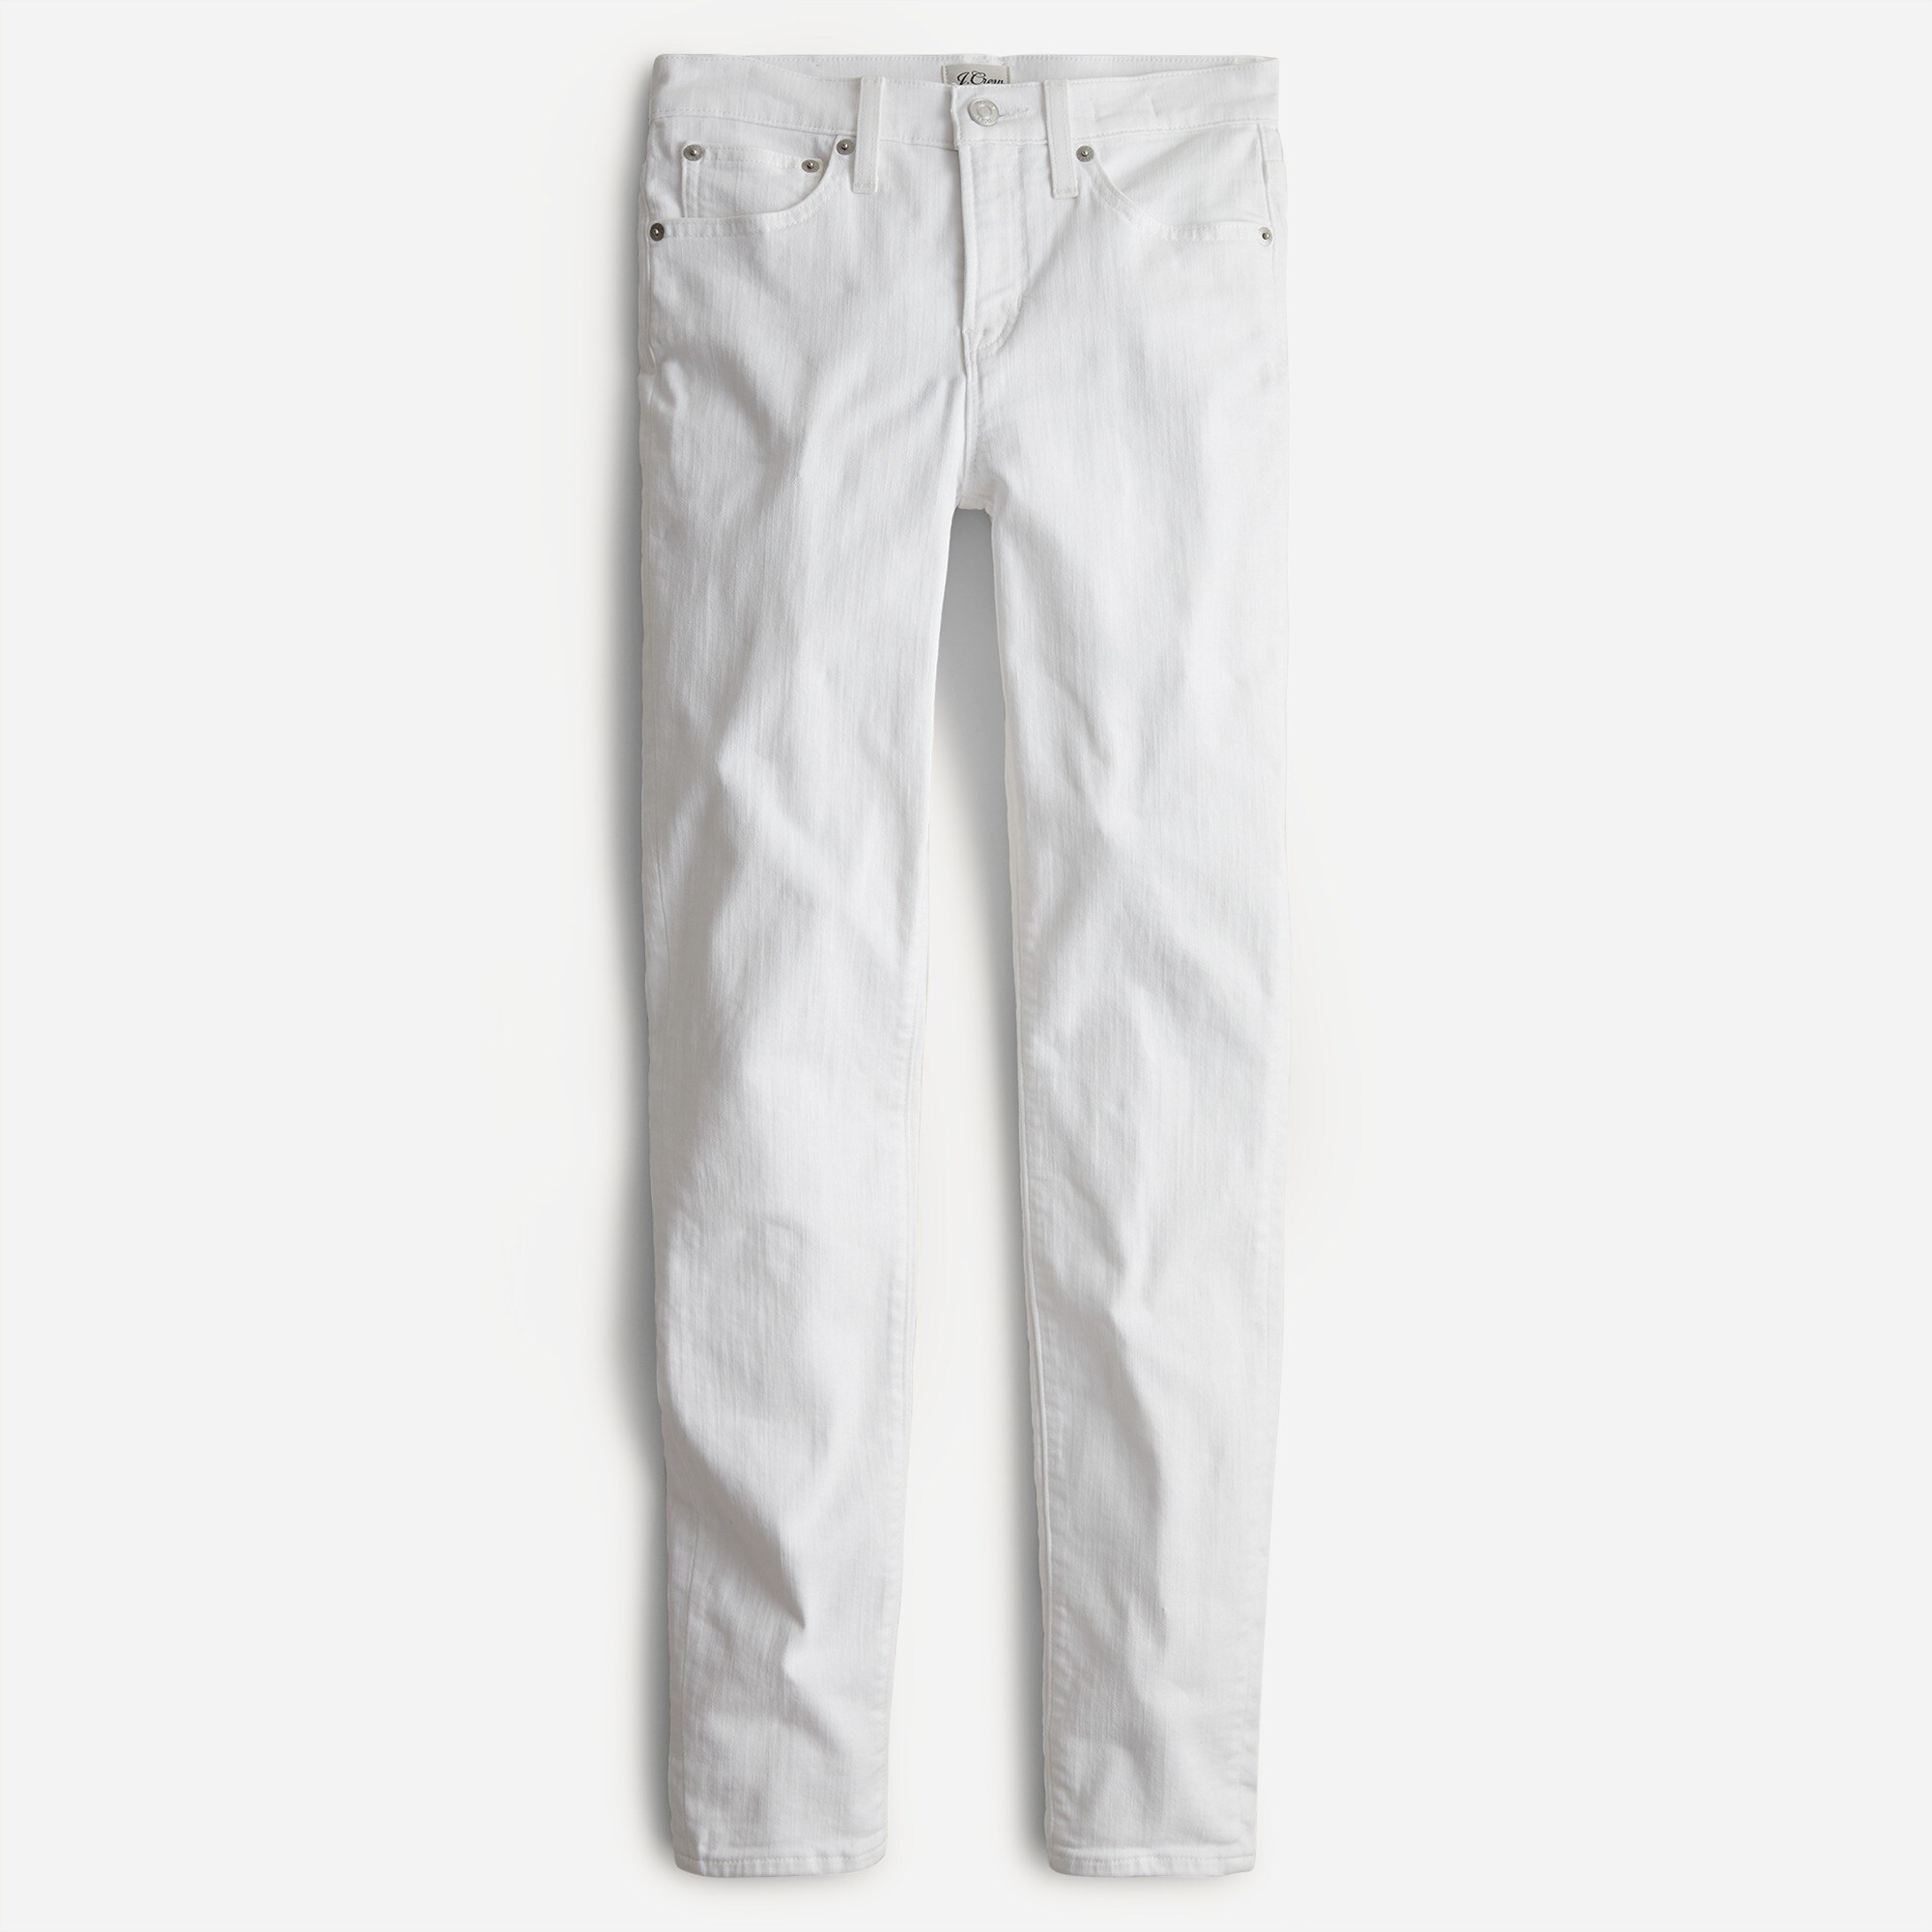  9" mid-rise toothpick jean in white